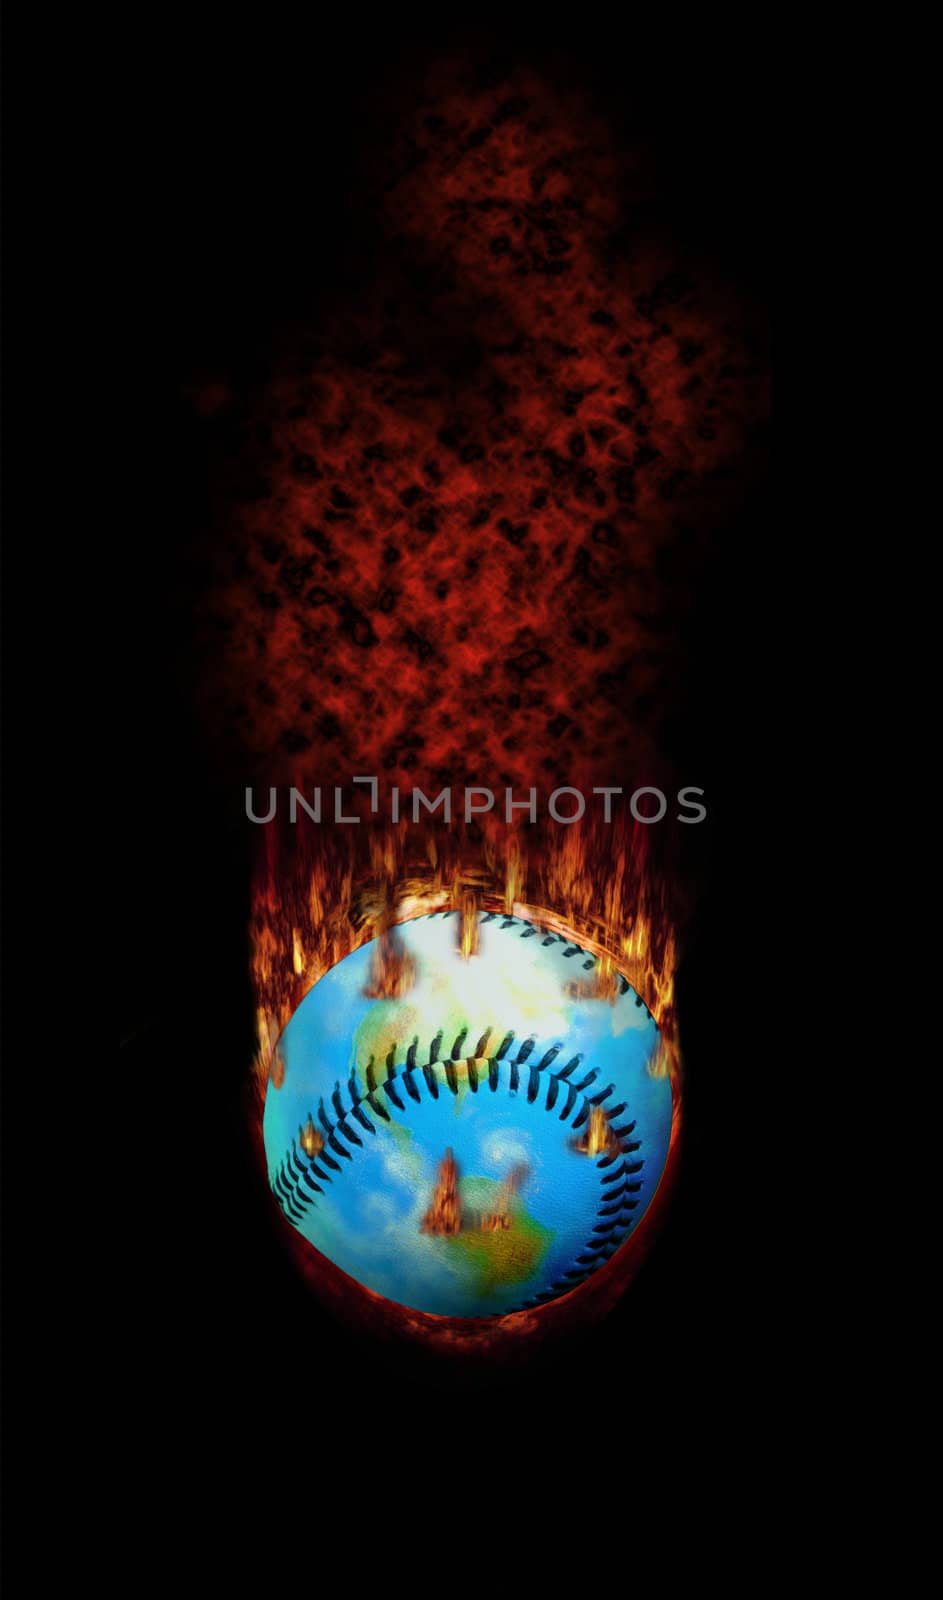 Detailed. This burning baseball globe was hit too hard - it flies with fire, fume and flames...